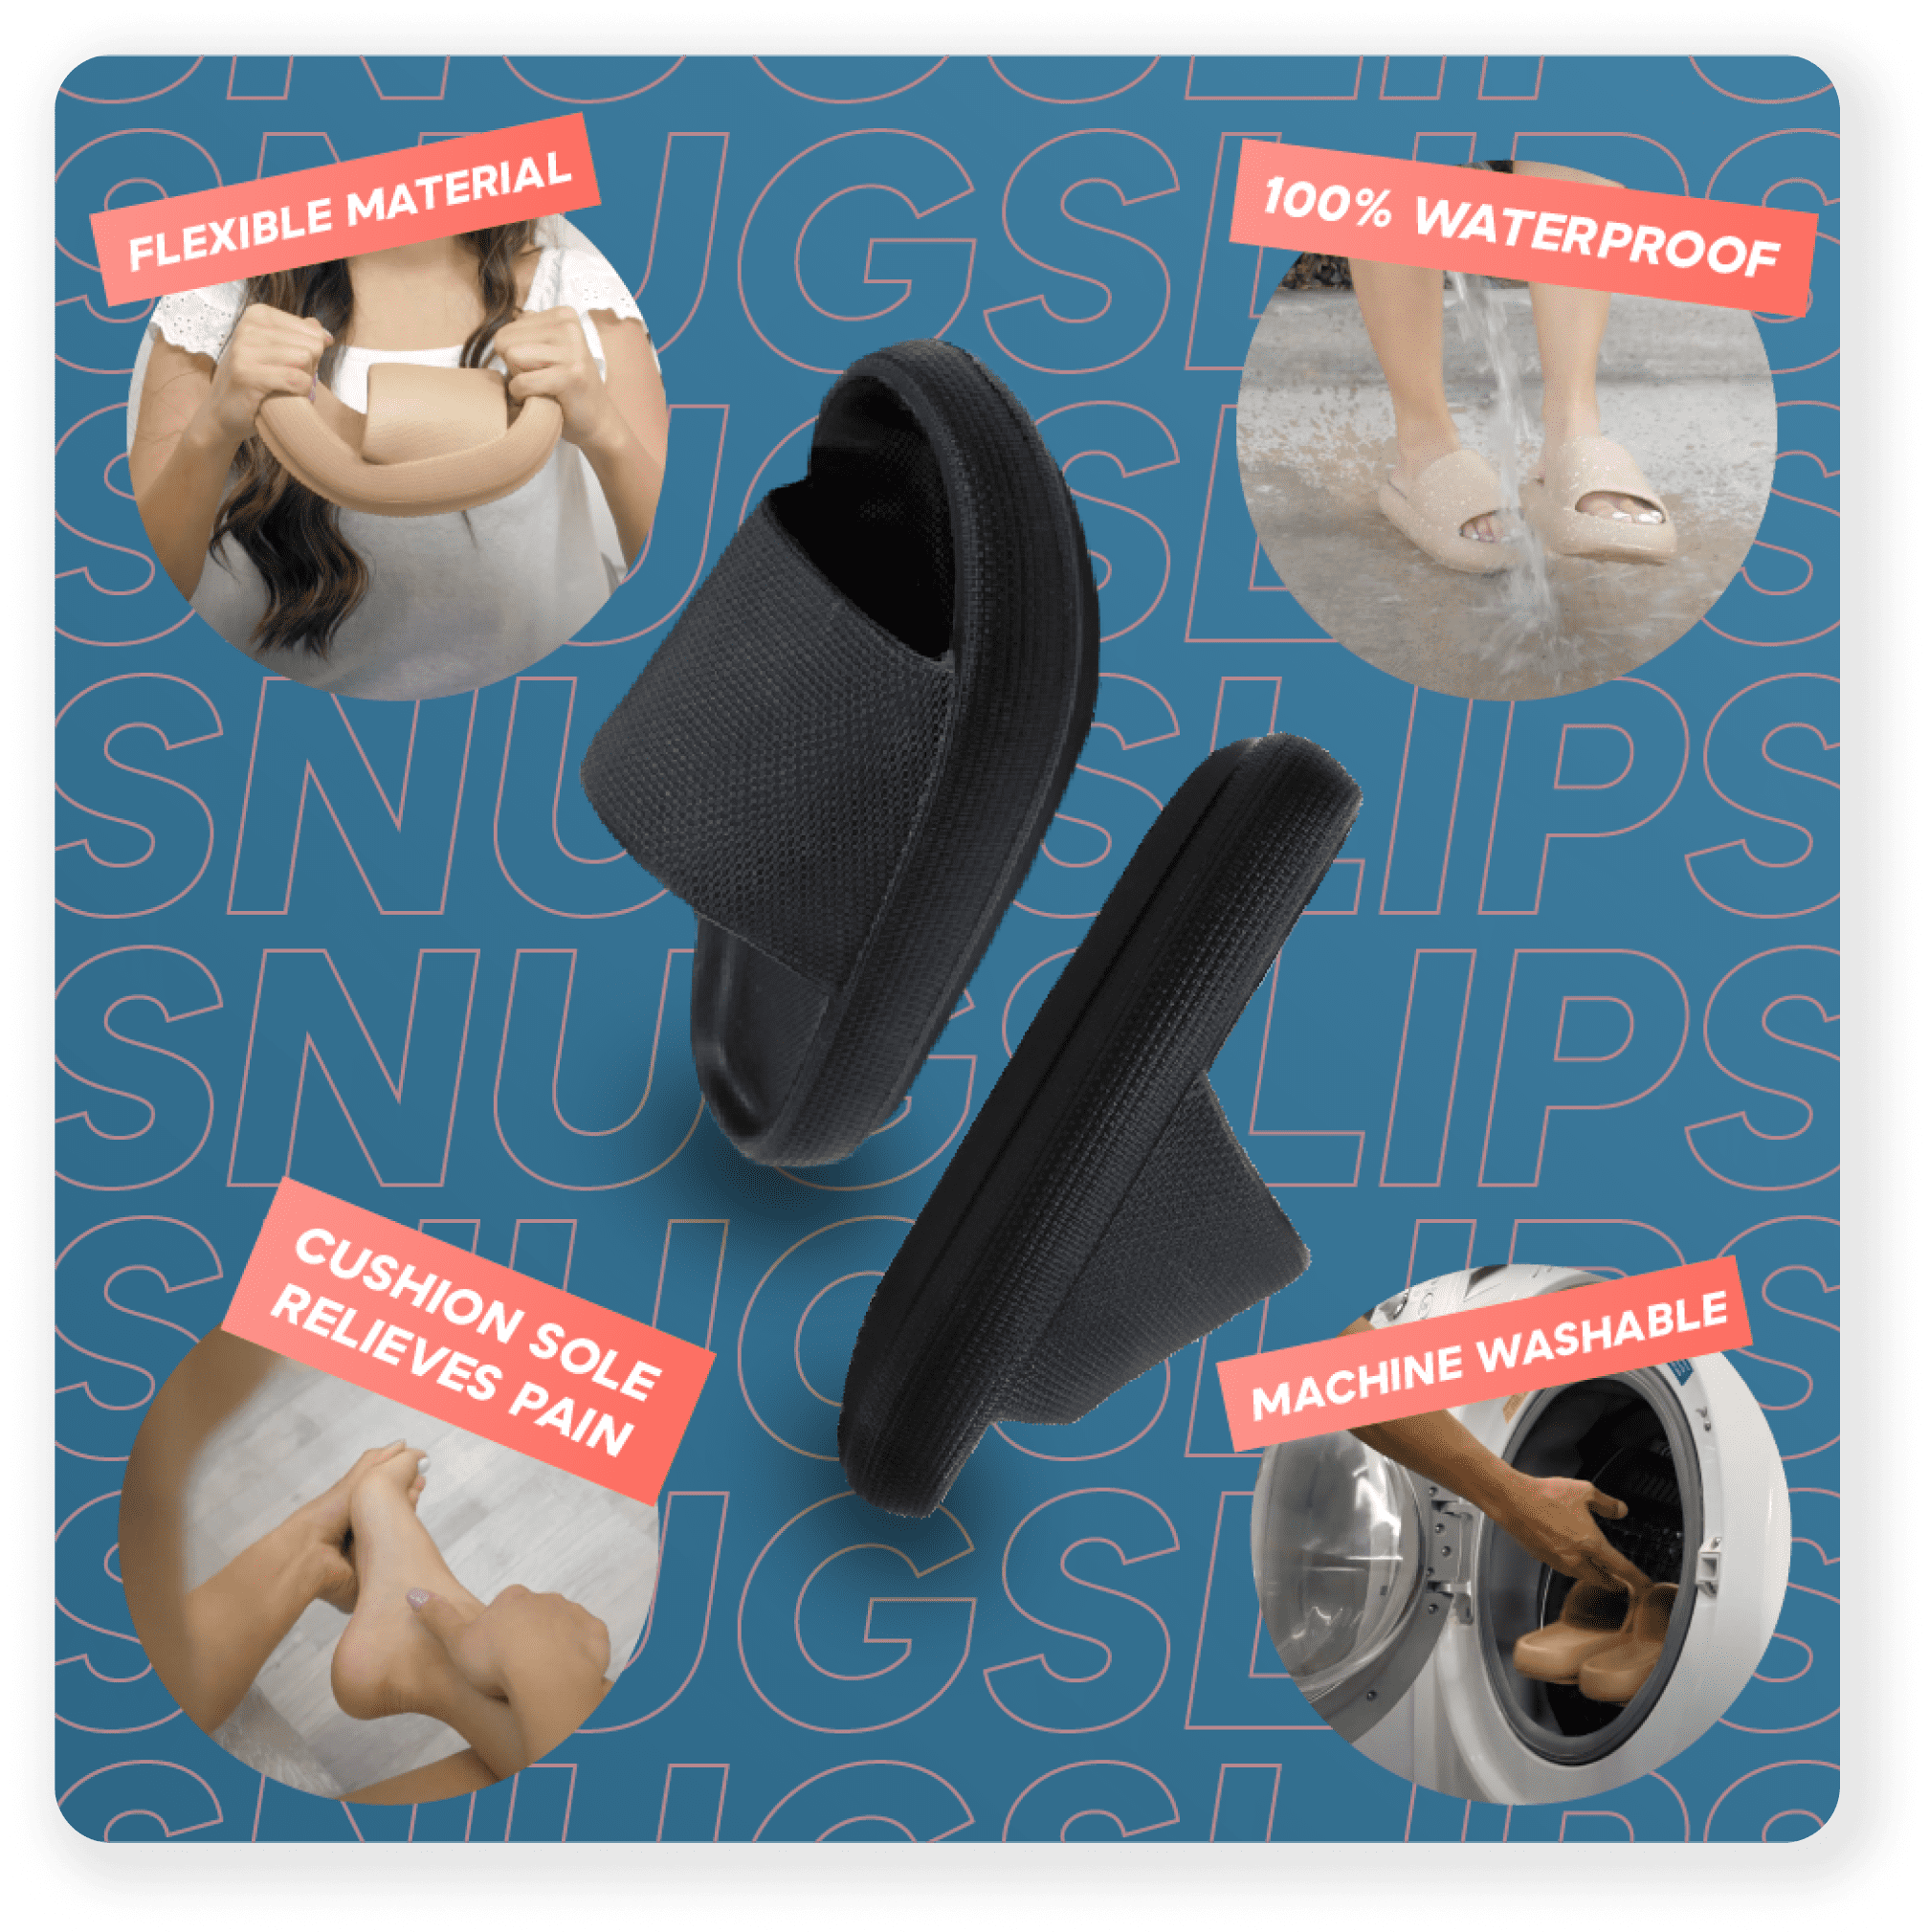 Slipper’s advertising featuring benefits, flexible material, 100% waterproof, cushion sole relieves pain, machine washable.